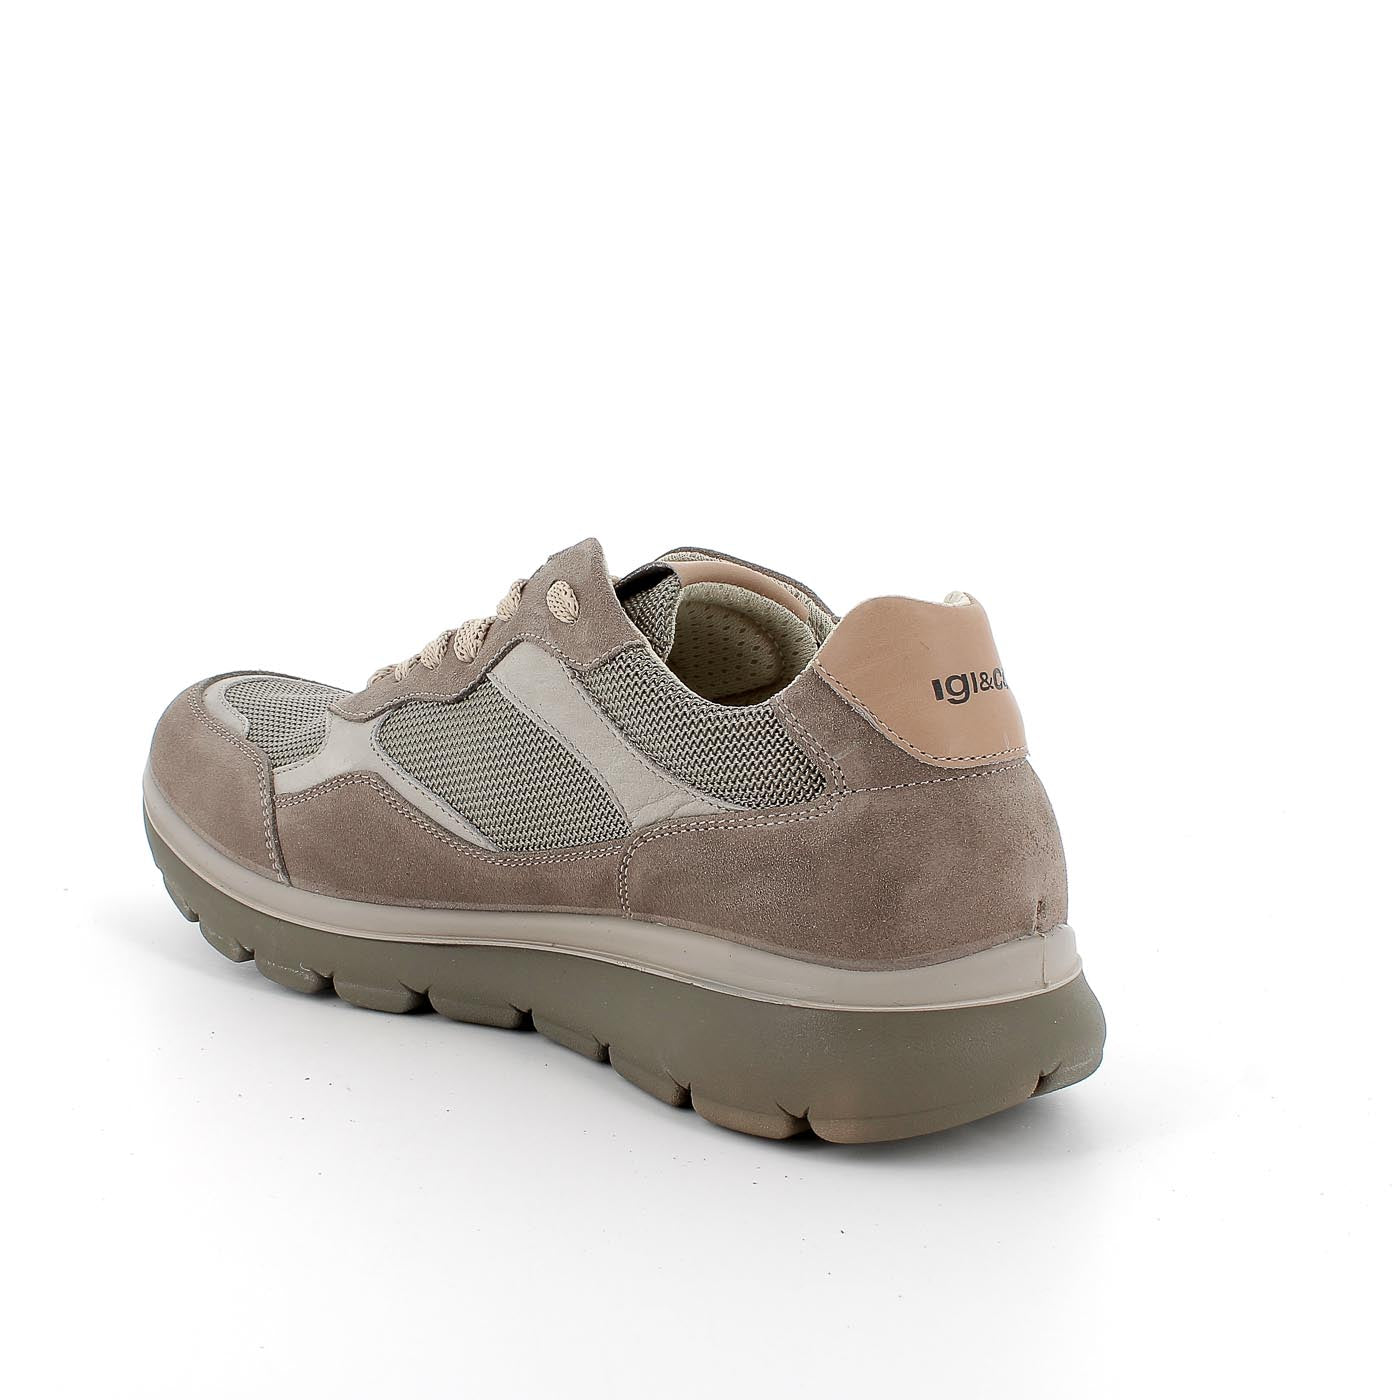 Igi & Co Men's Taupe Leather-Textile Runner Shoes with Shock Absorber